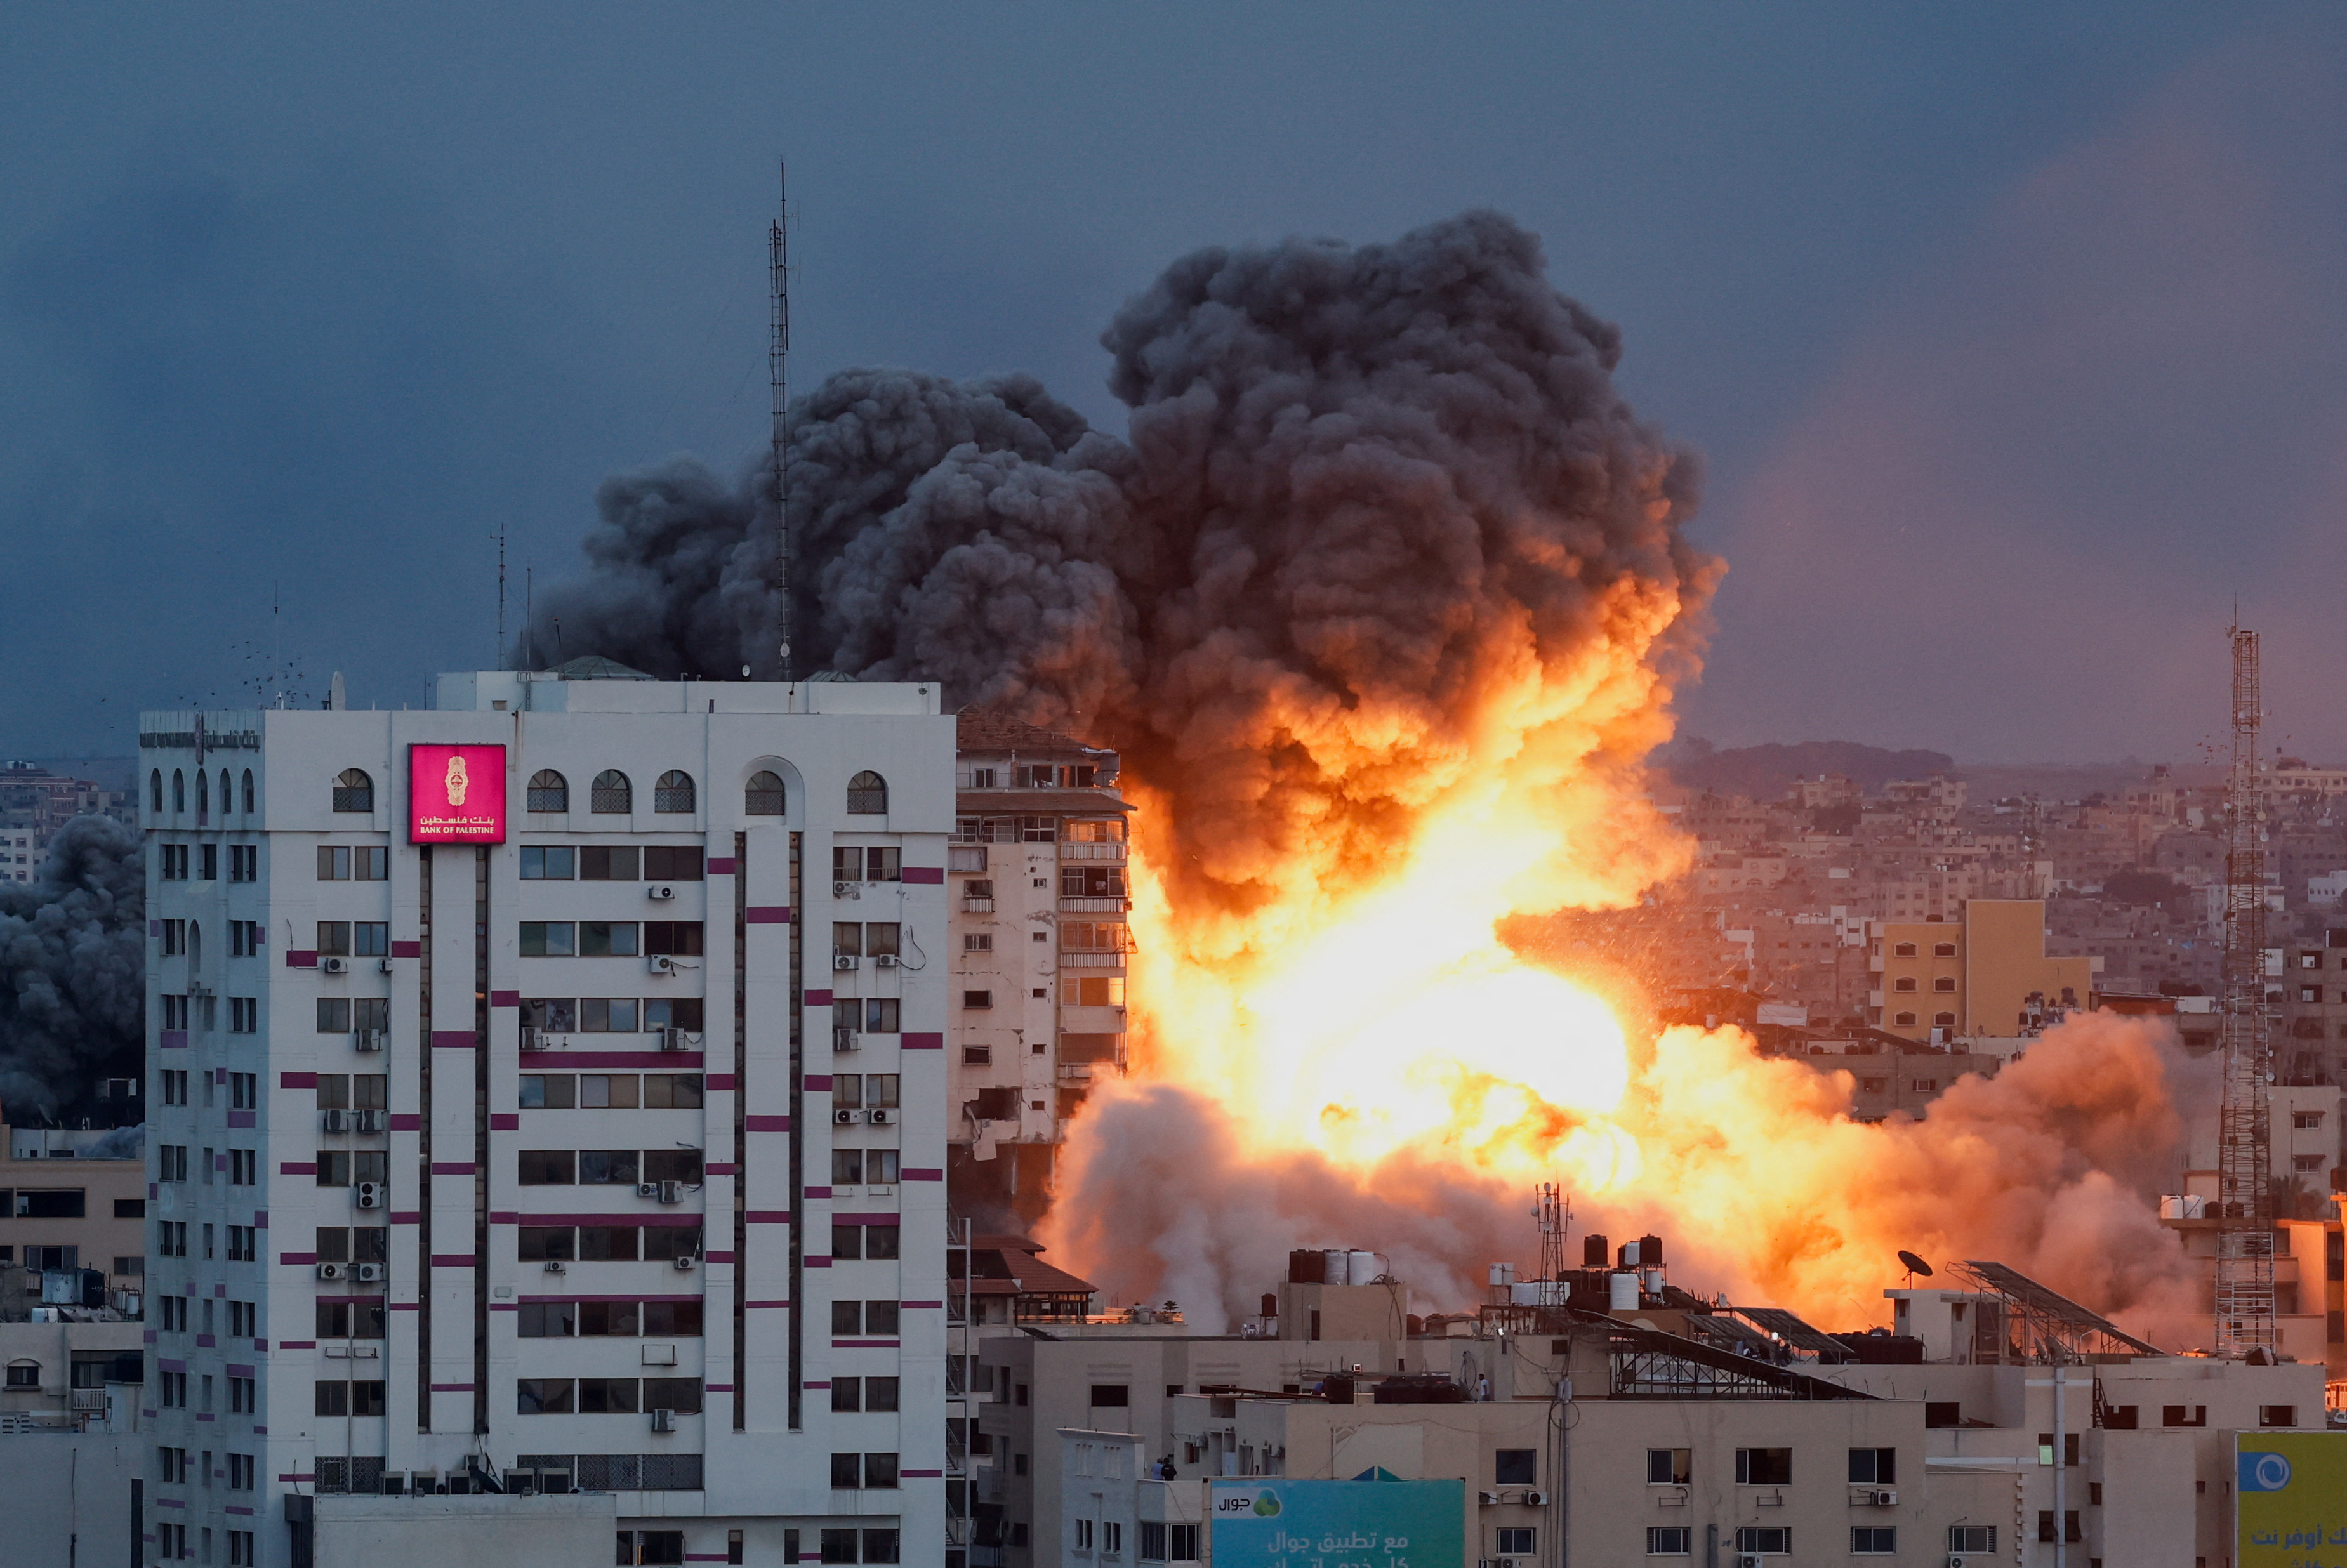 Towers in Gaza city have been reduced to rubble as Israel fights back